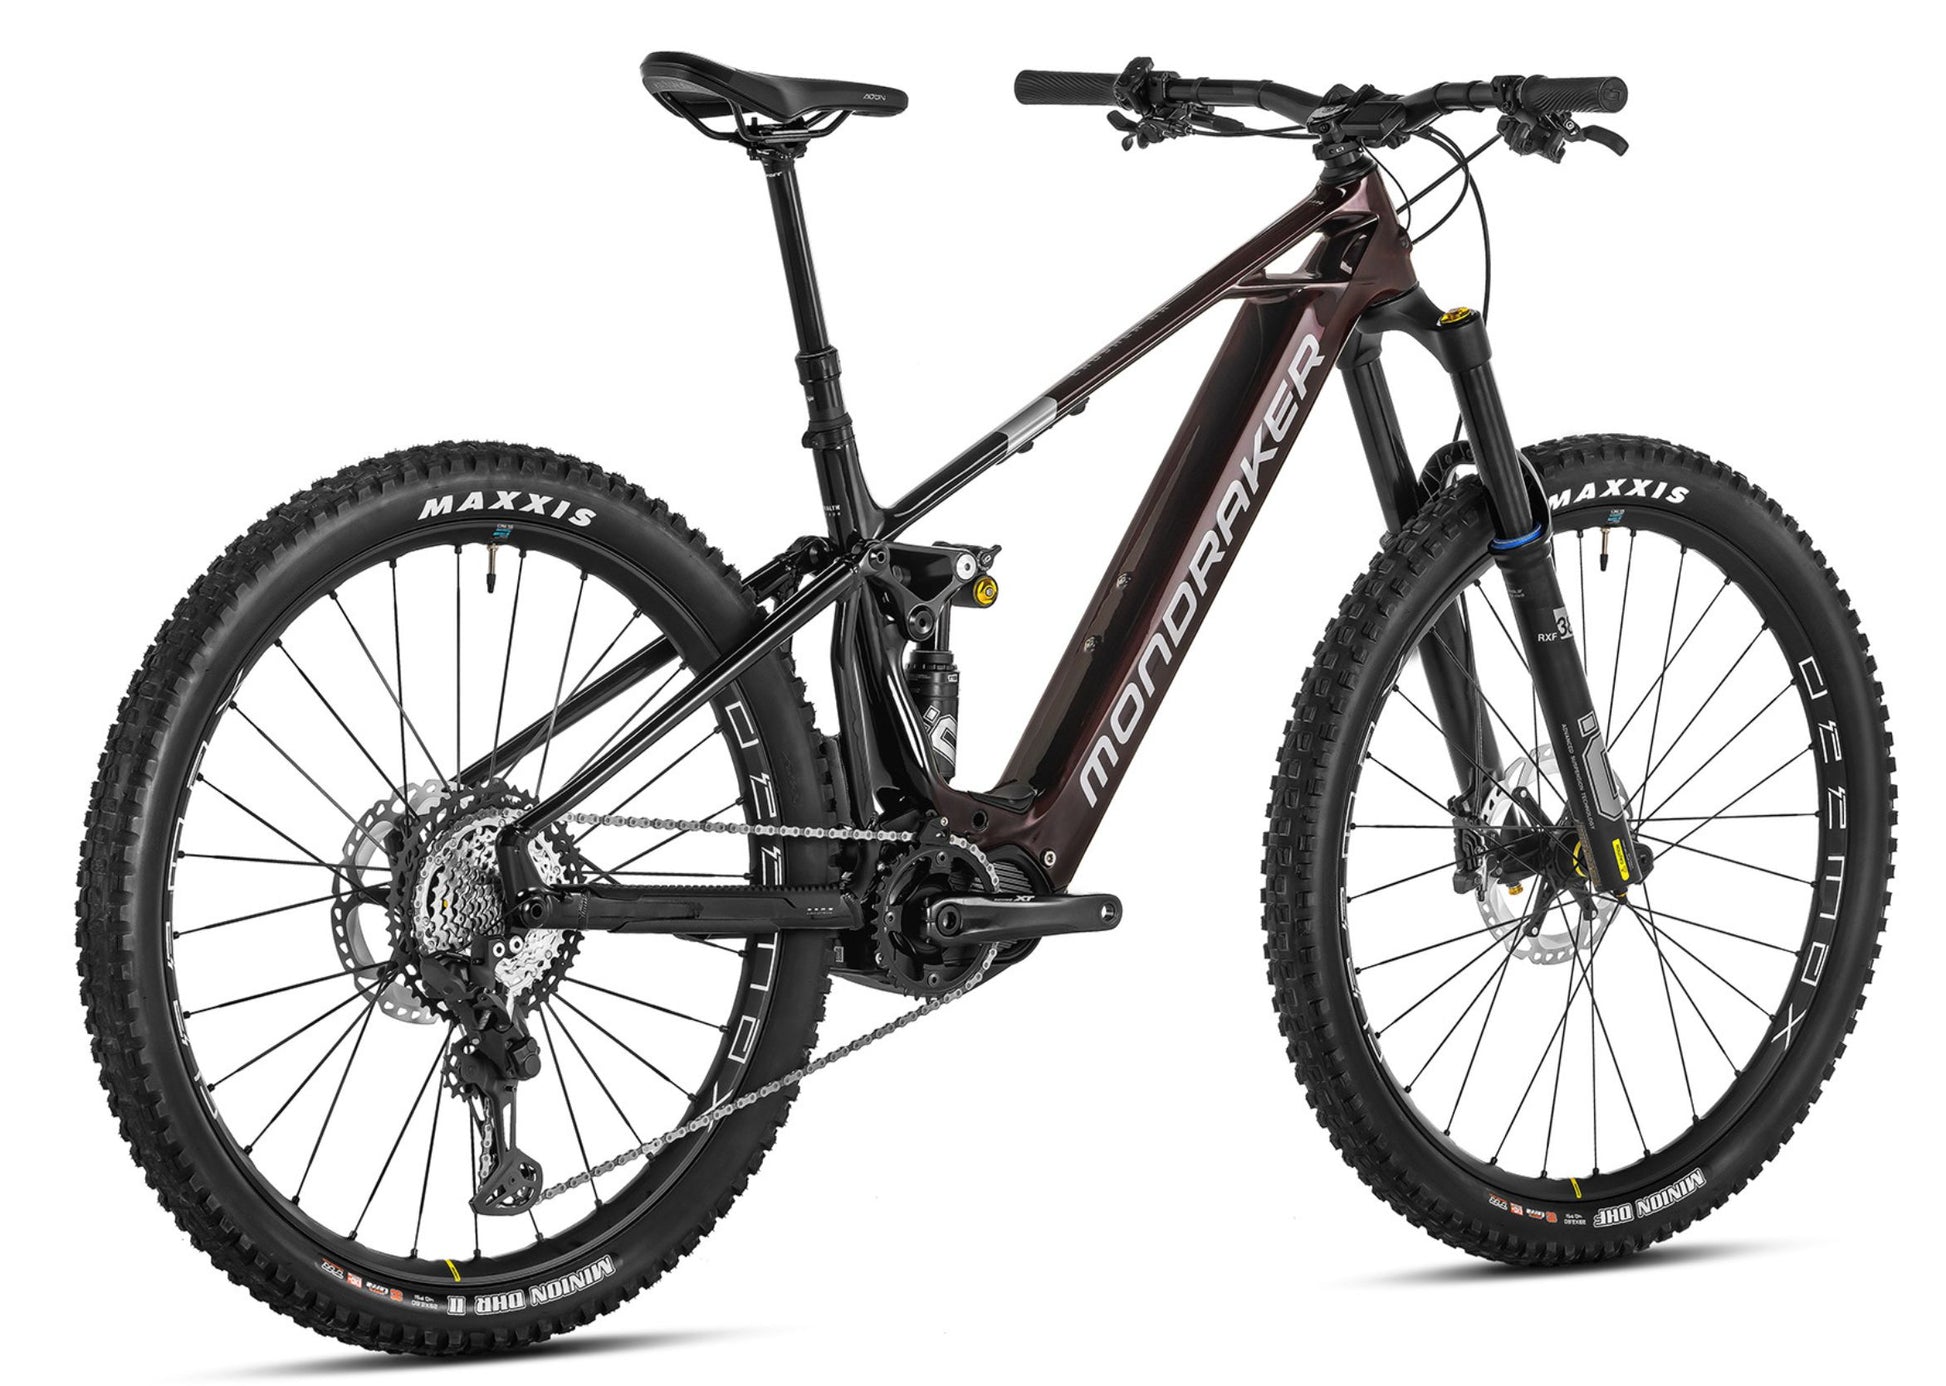 Mondraker Crusher RR Transulcent red carbon / black / silver Full Suspension eMTB Rear facing view